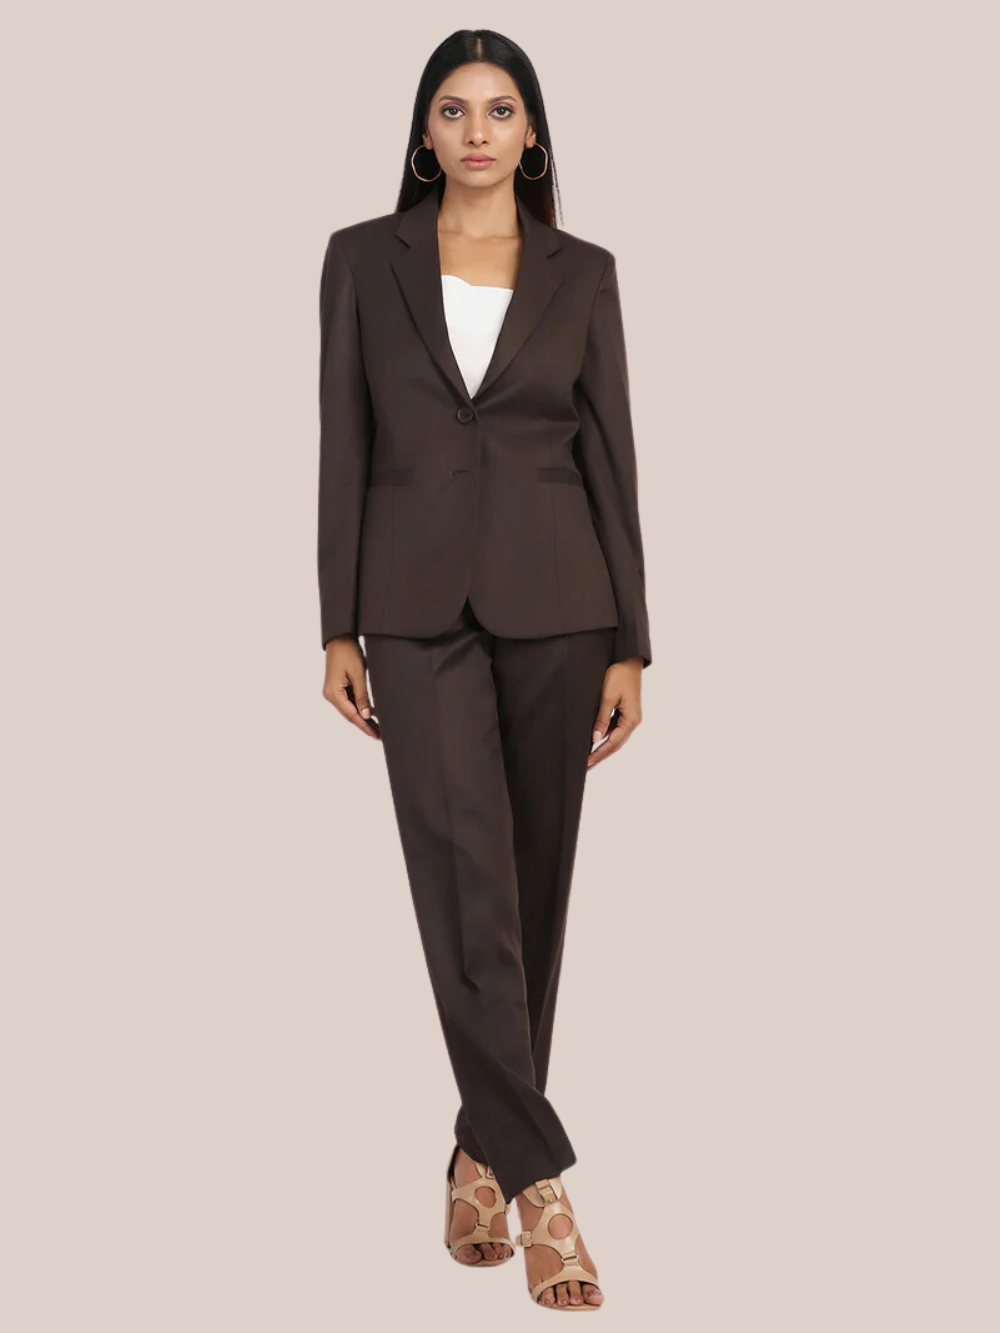 Buy Business Suits for Women